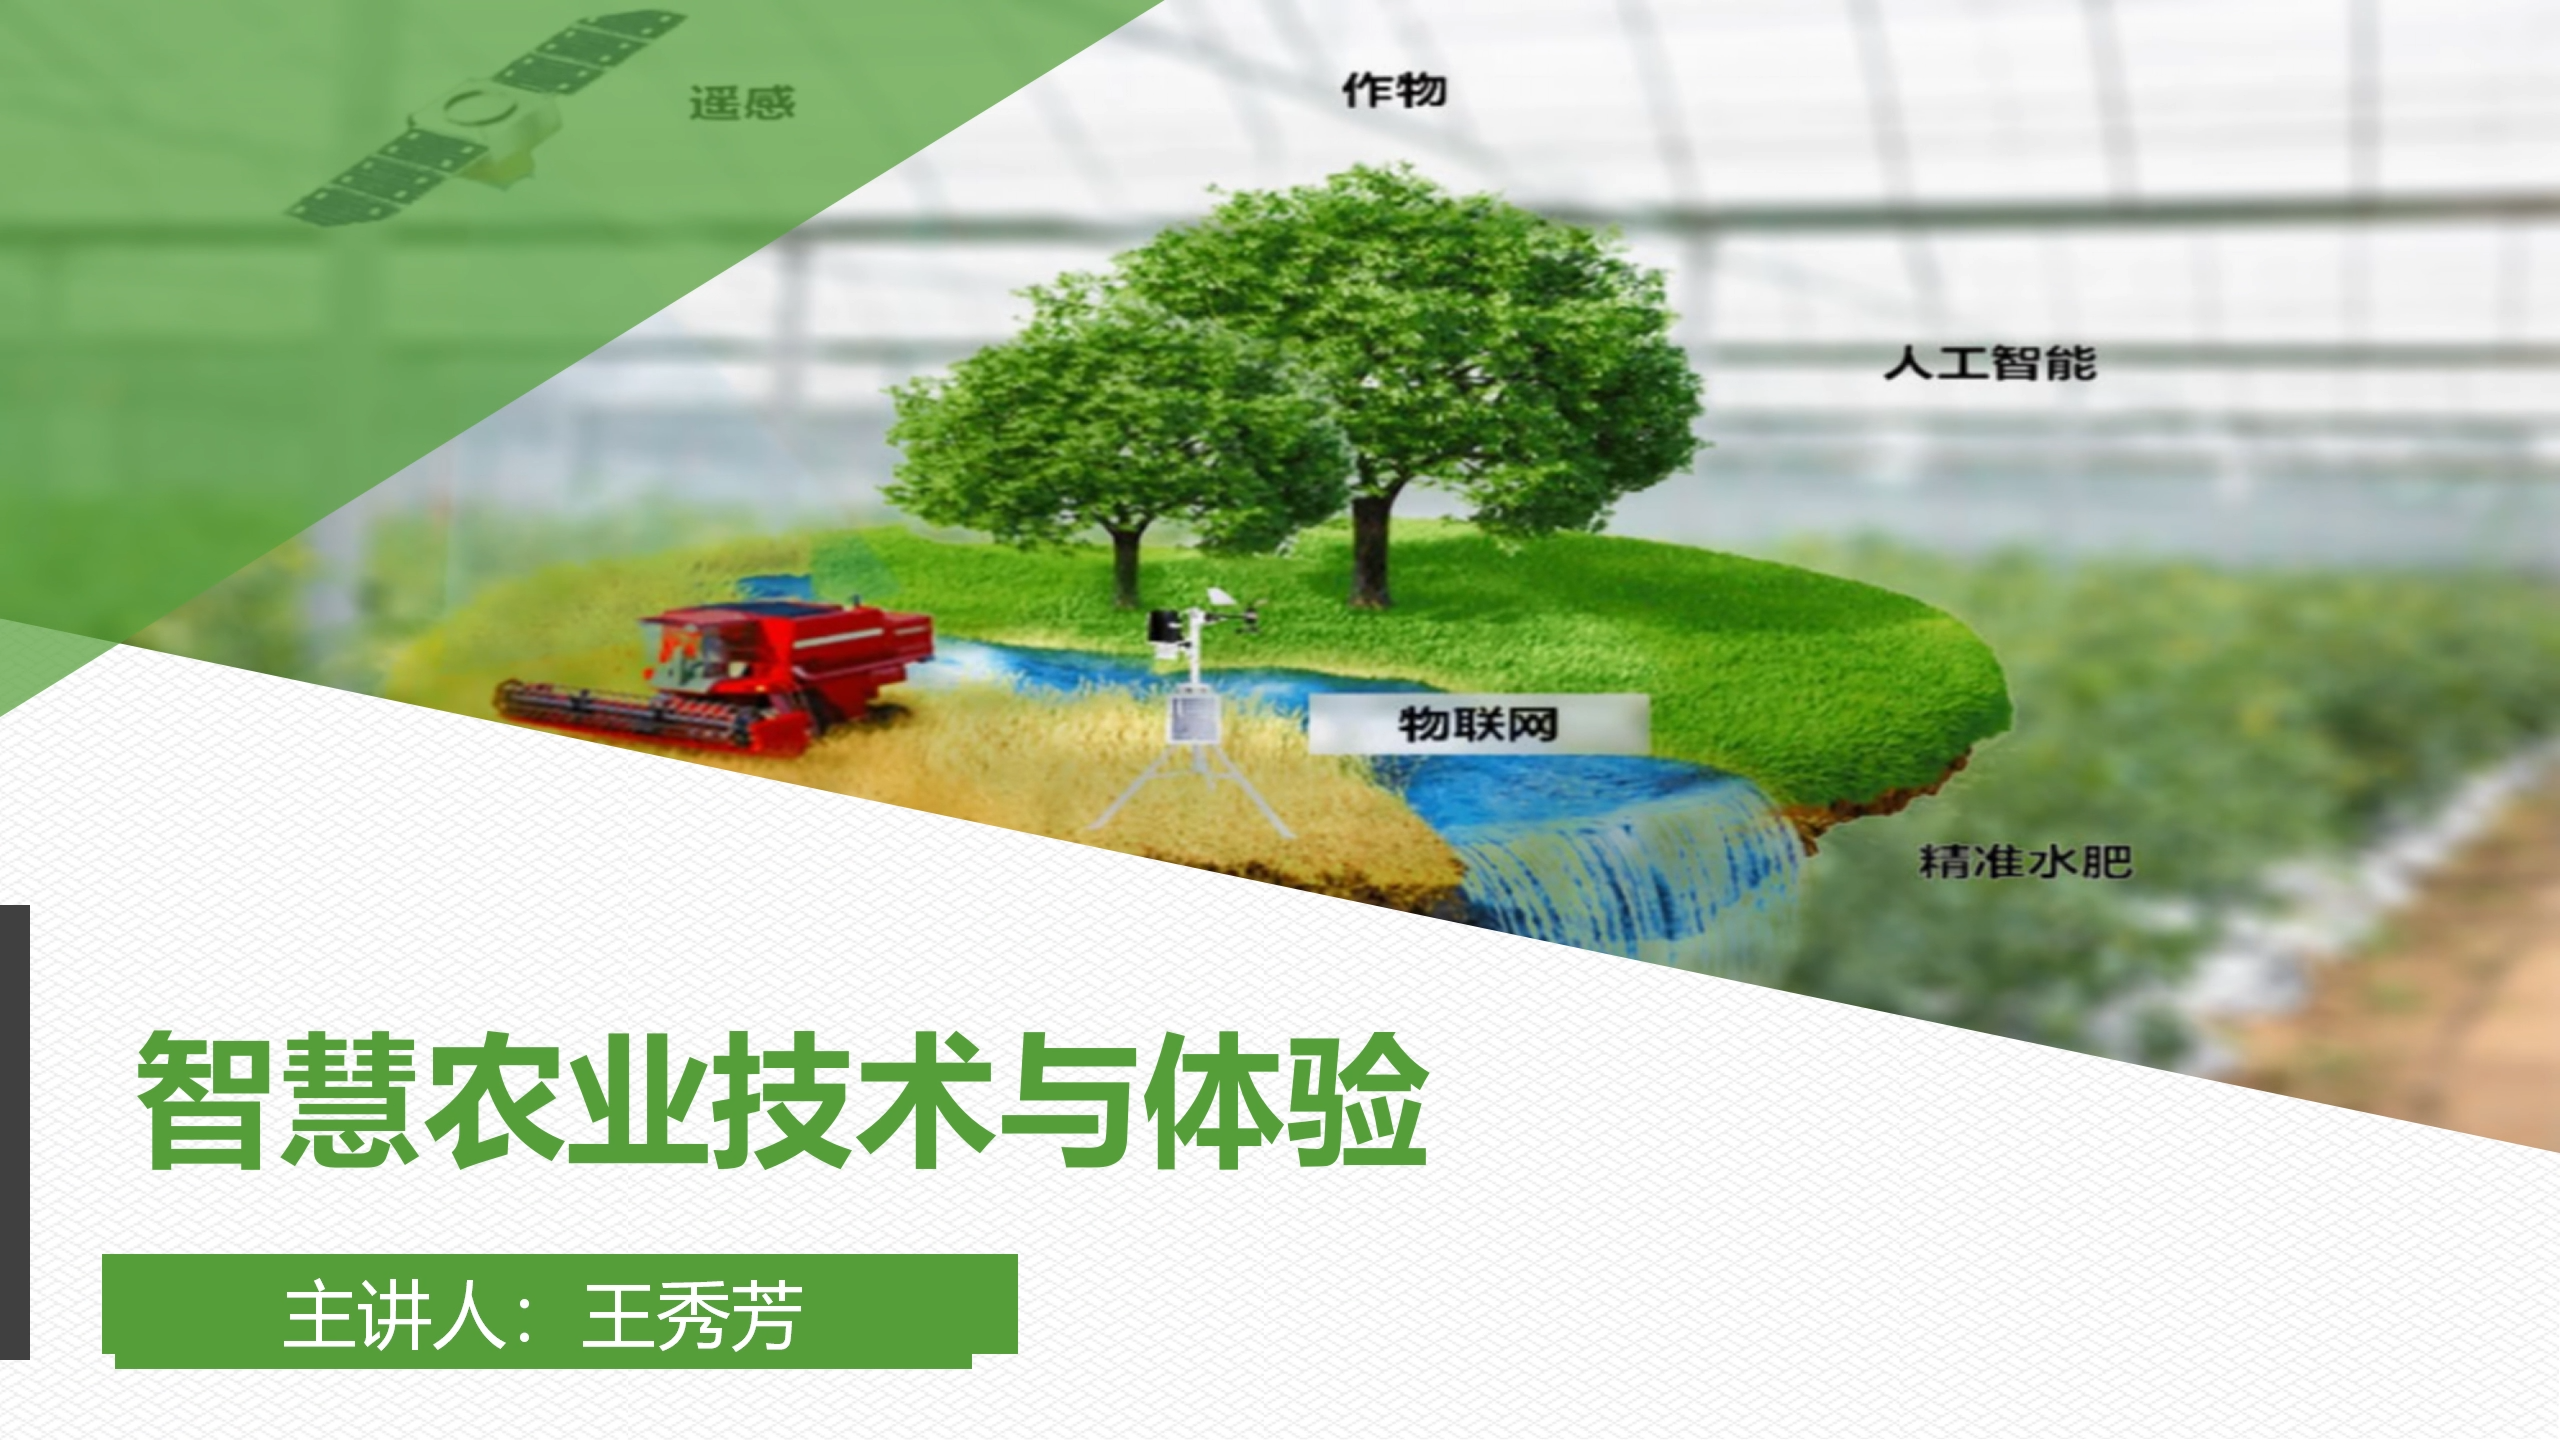 Wisdom agricultural technology and experience